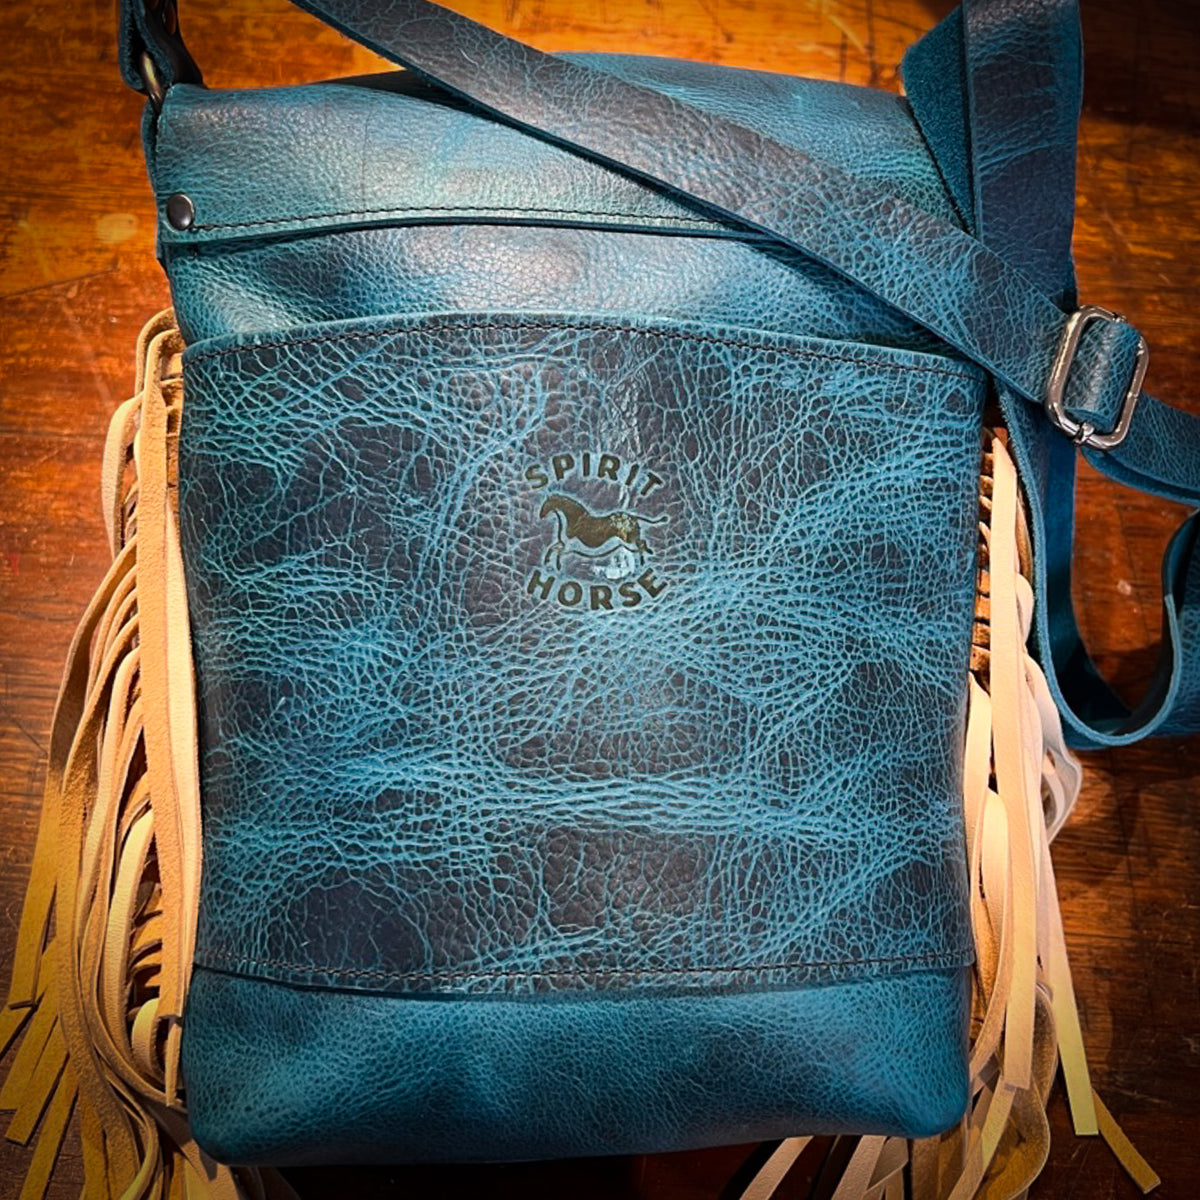 Blue Bison Bag with Three Horses and Fringe